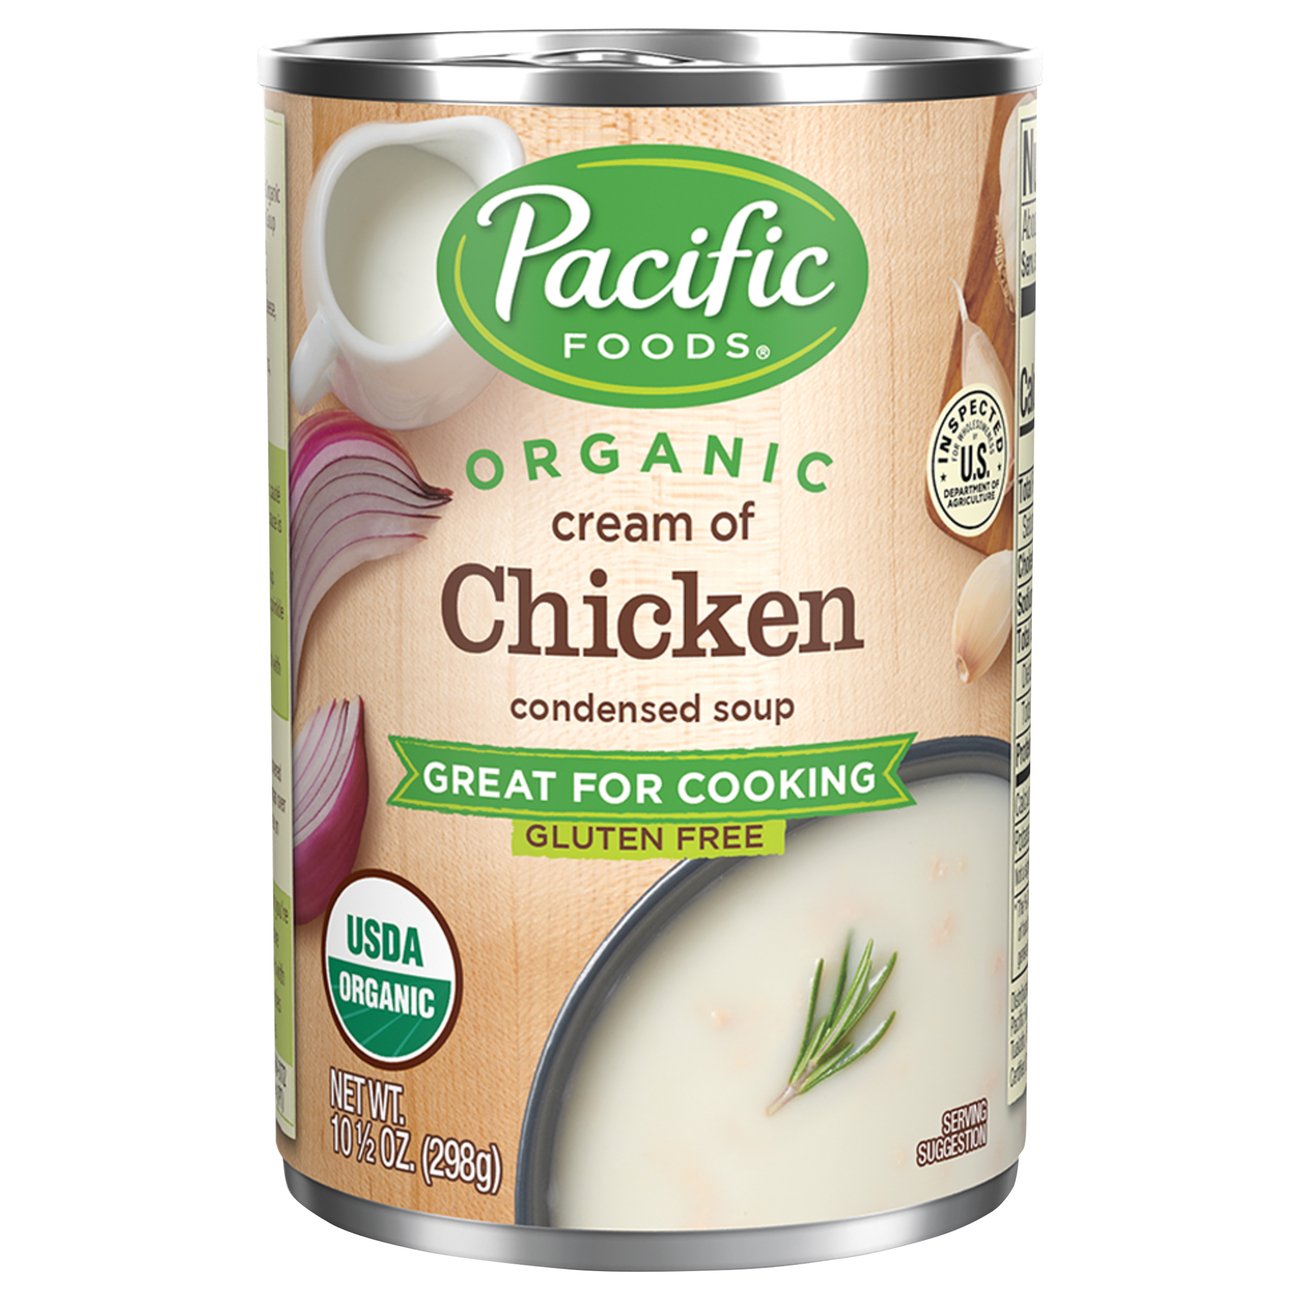 Pacific Foods Organic Cream of Chicken Condensed Soup - Shop Soups